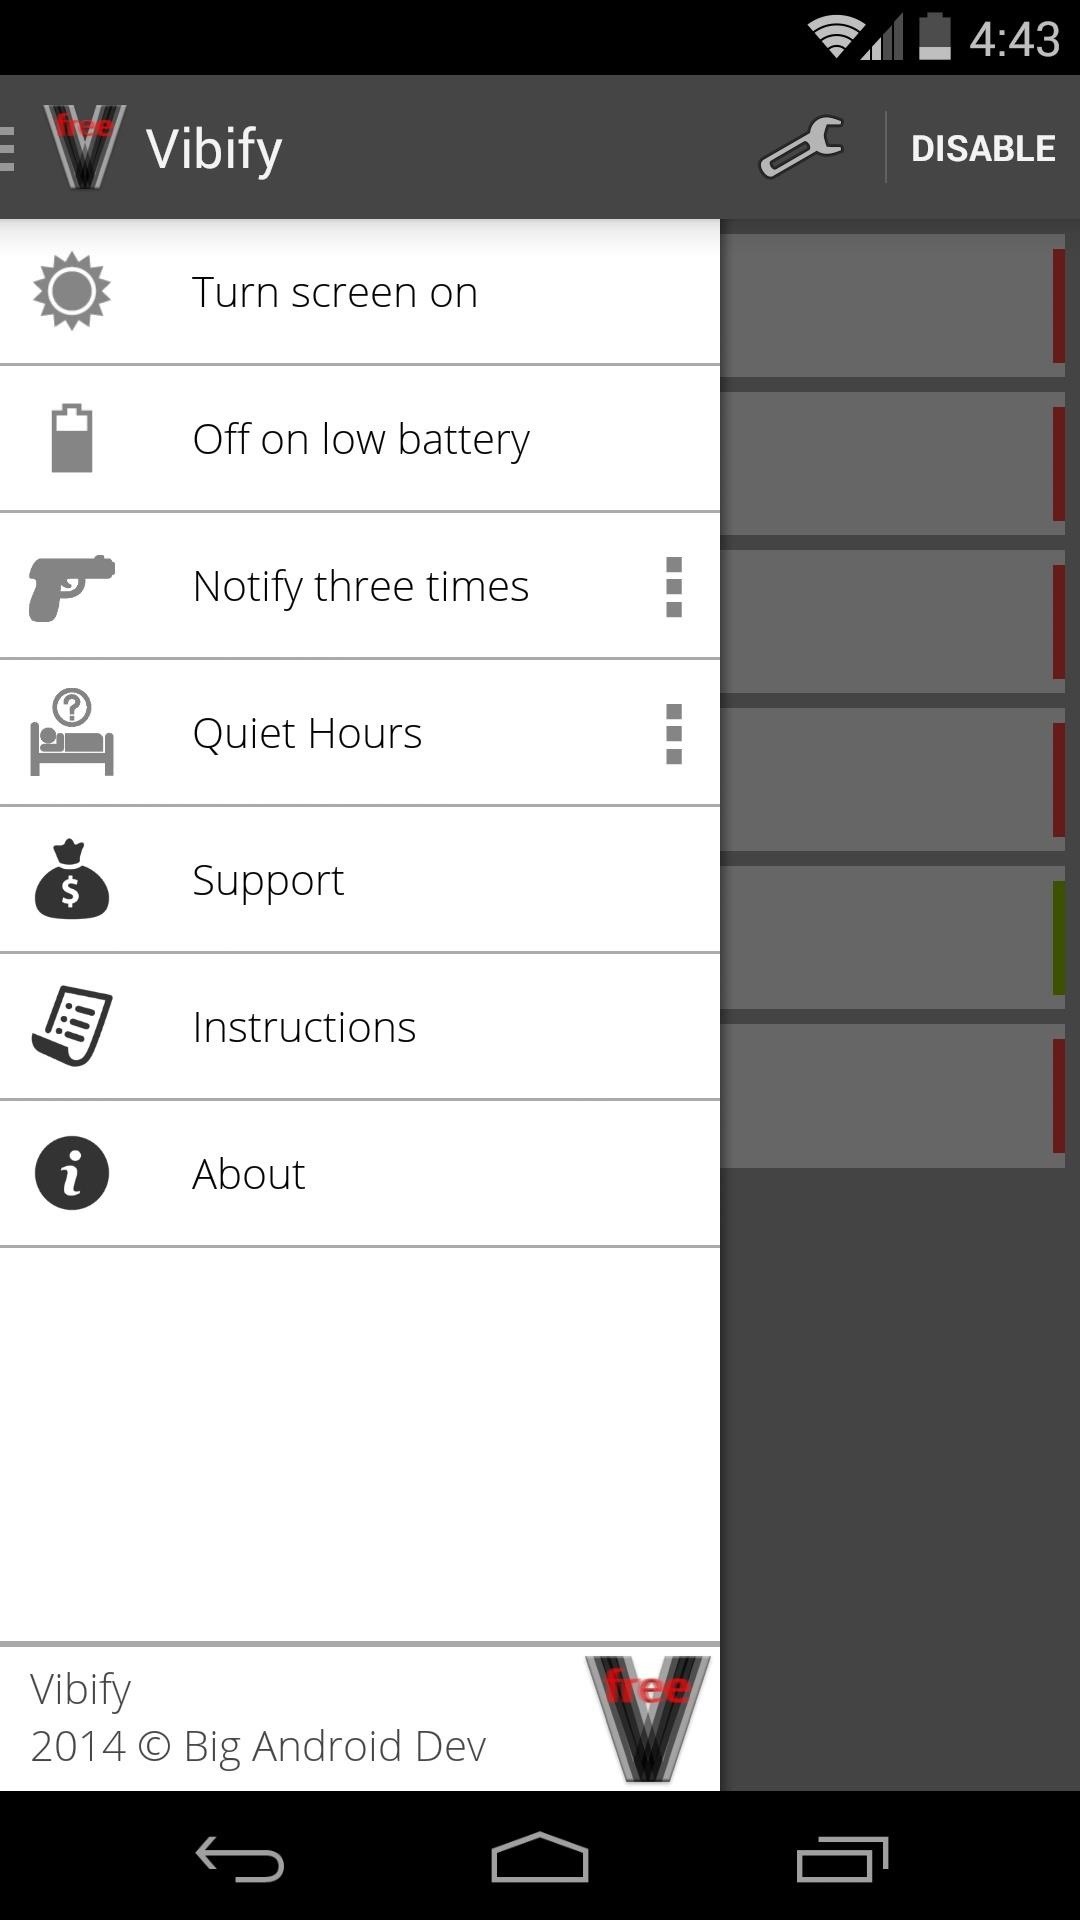 How to Get the Samsung Galaxy "Smart Alert" Feature on Your Nexus 5 or Other Android Phone